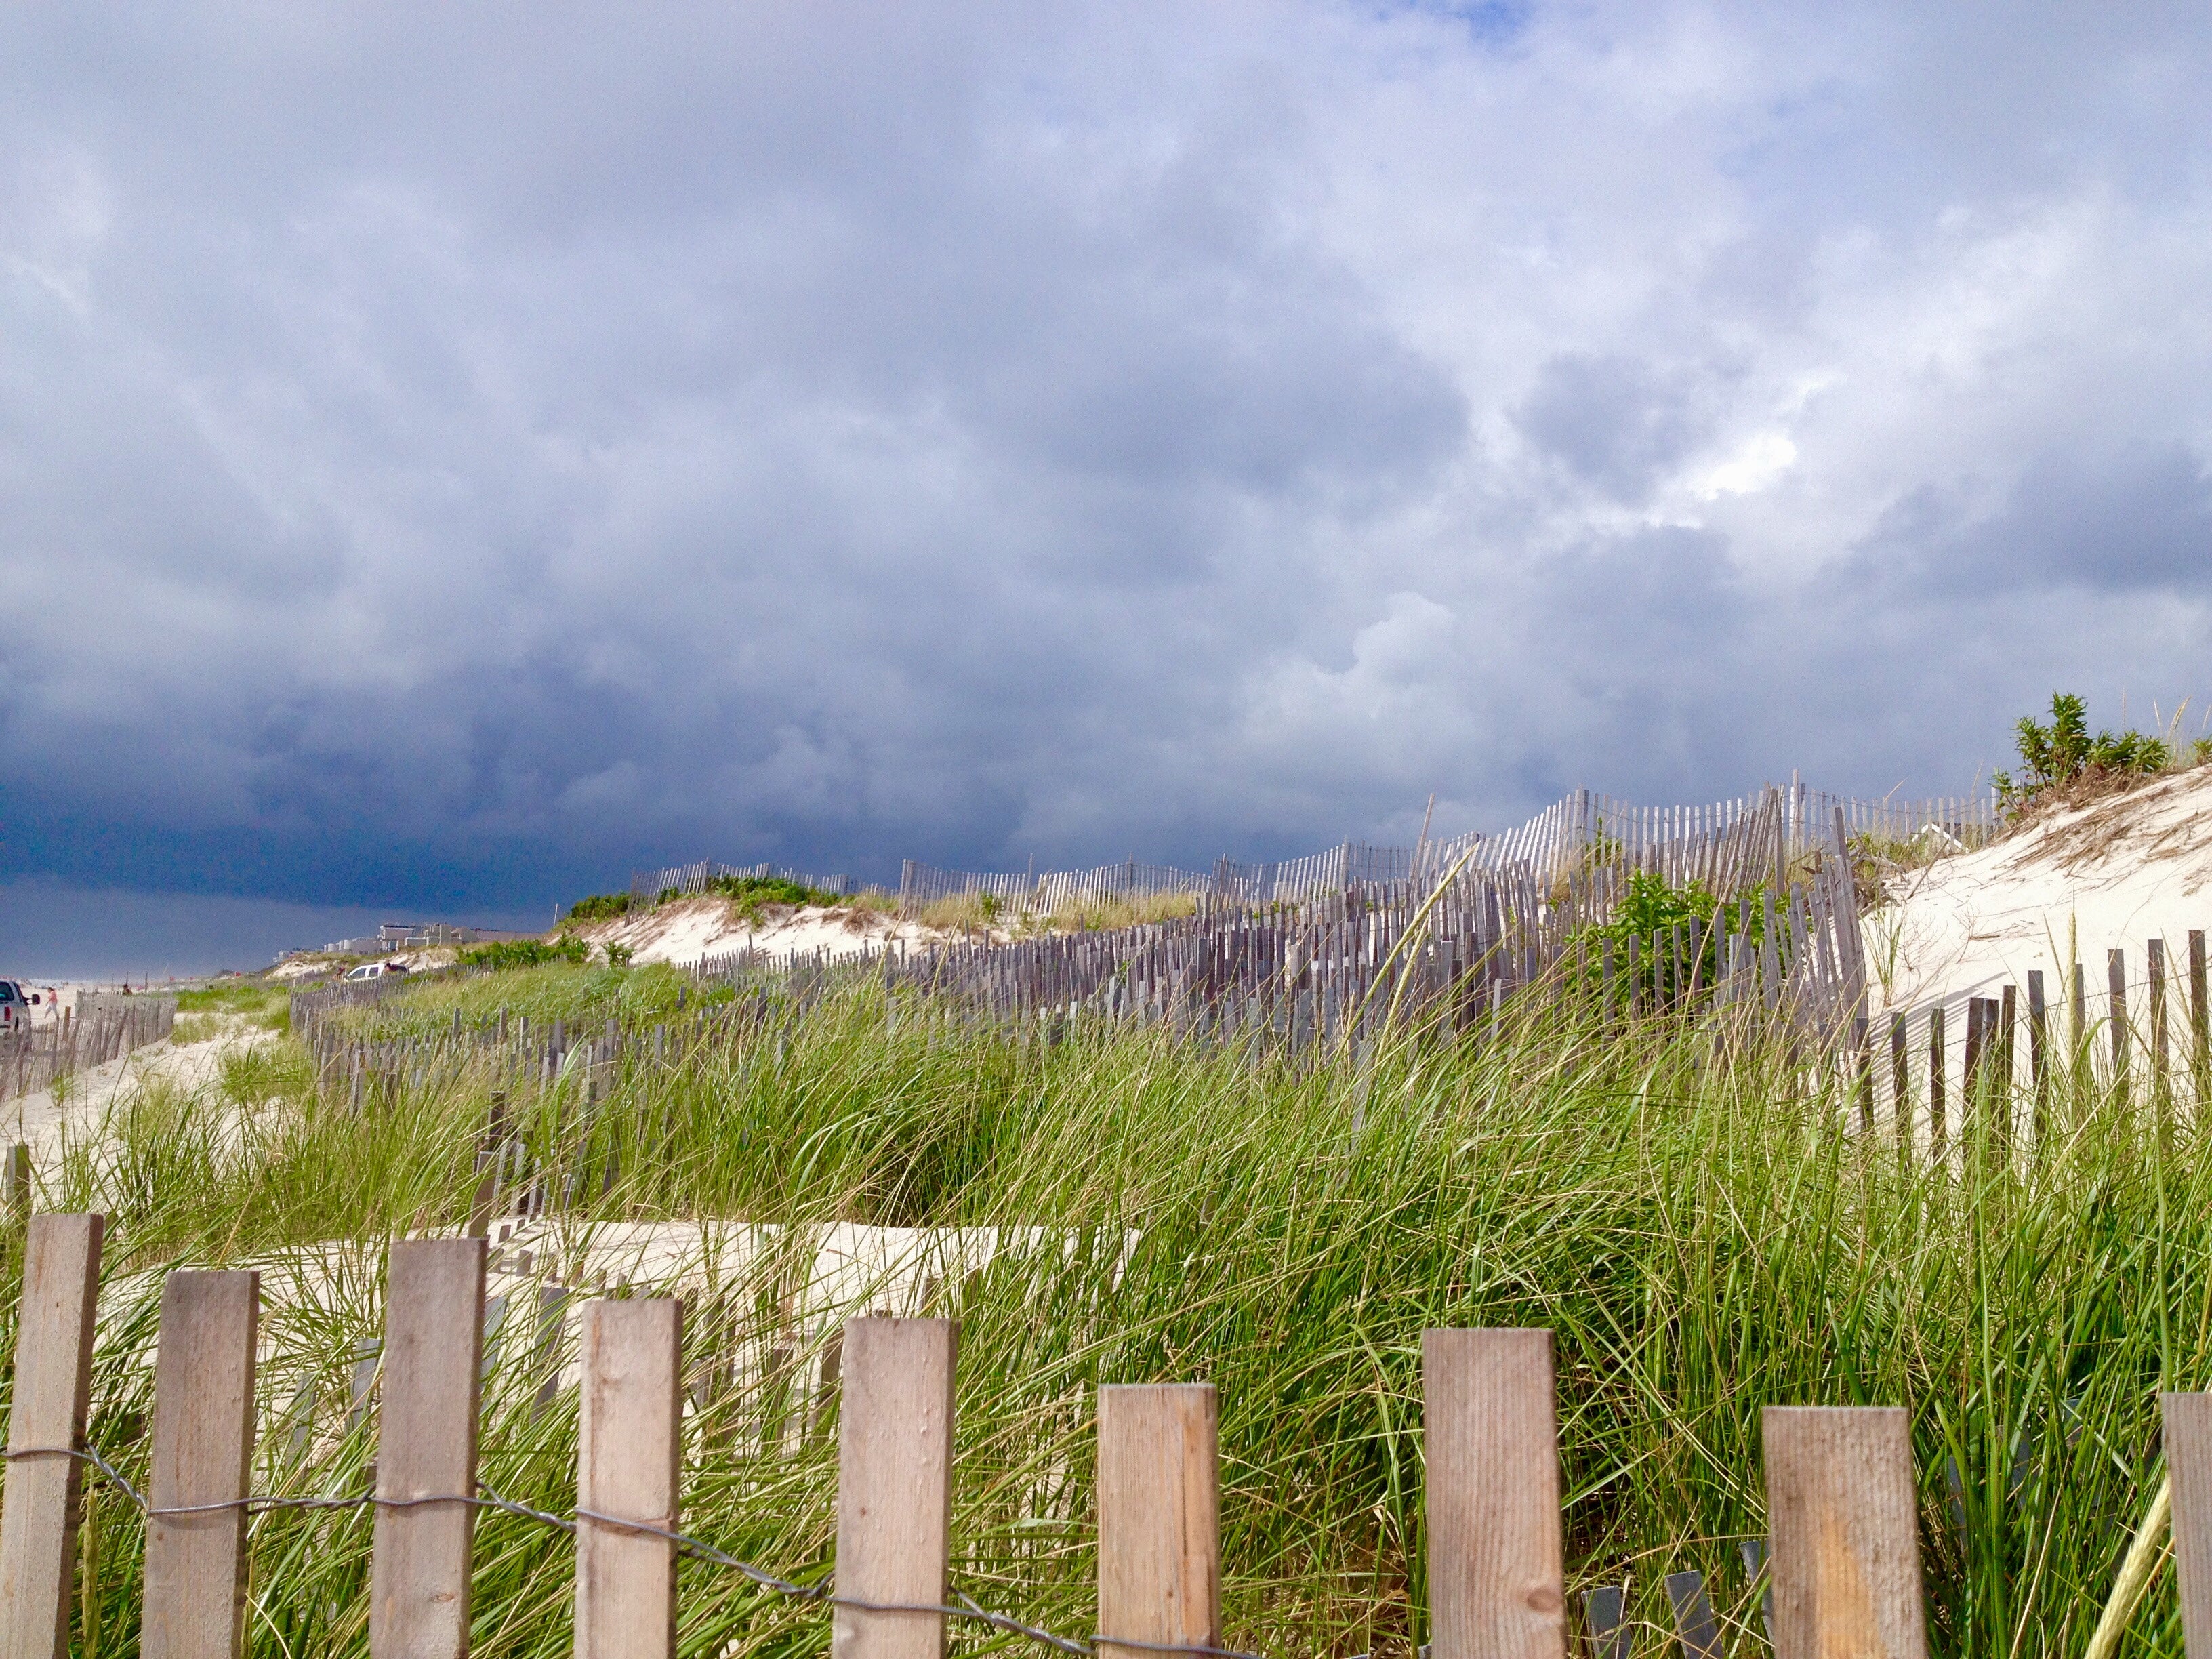 South Seaside Park dunes in August 2014. (Photo: Justin Auciello/JSHN)